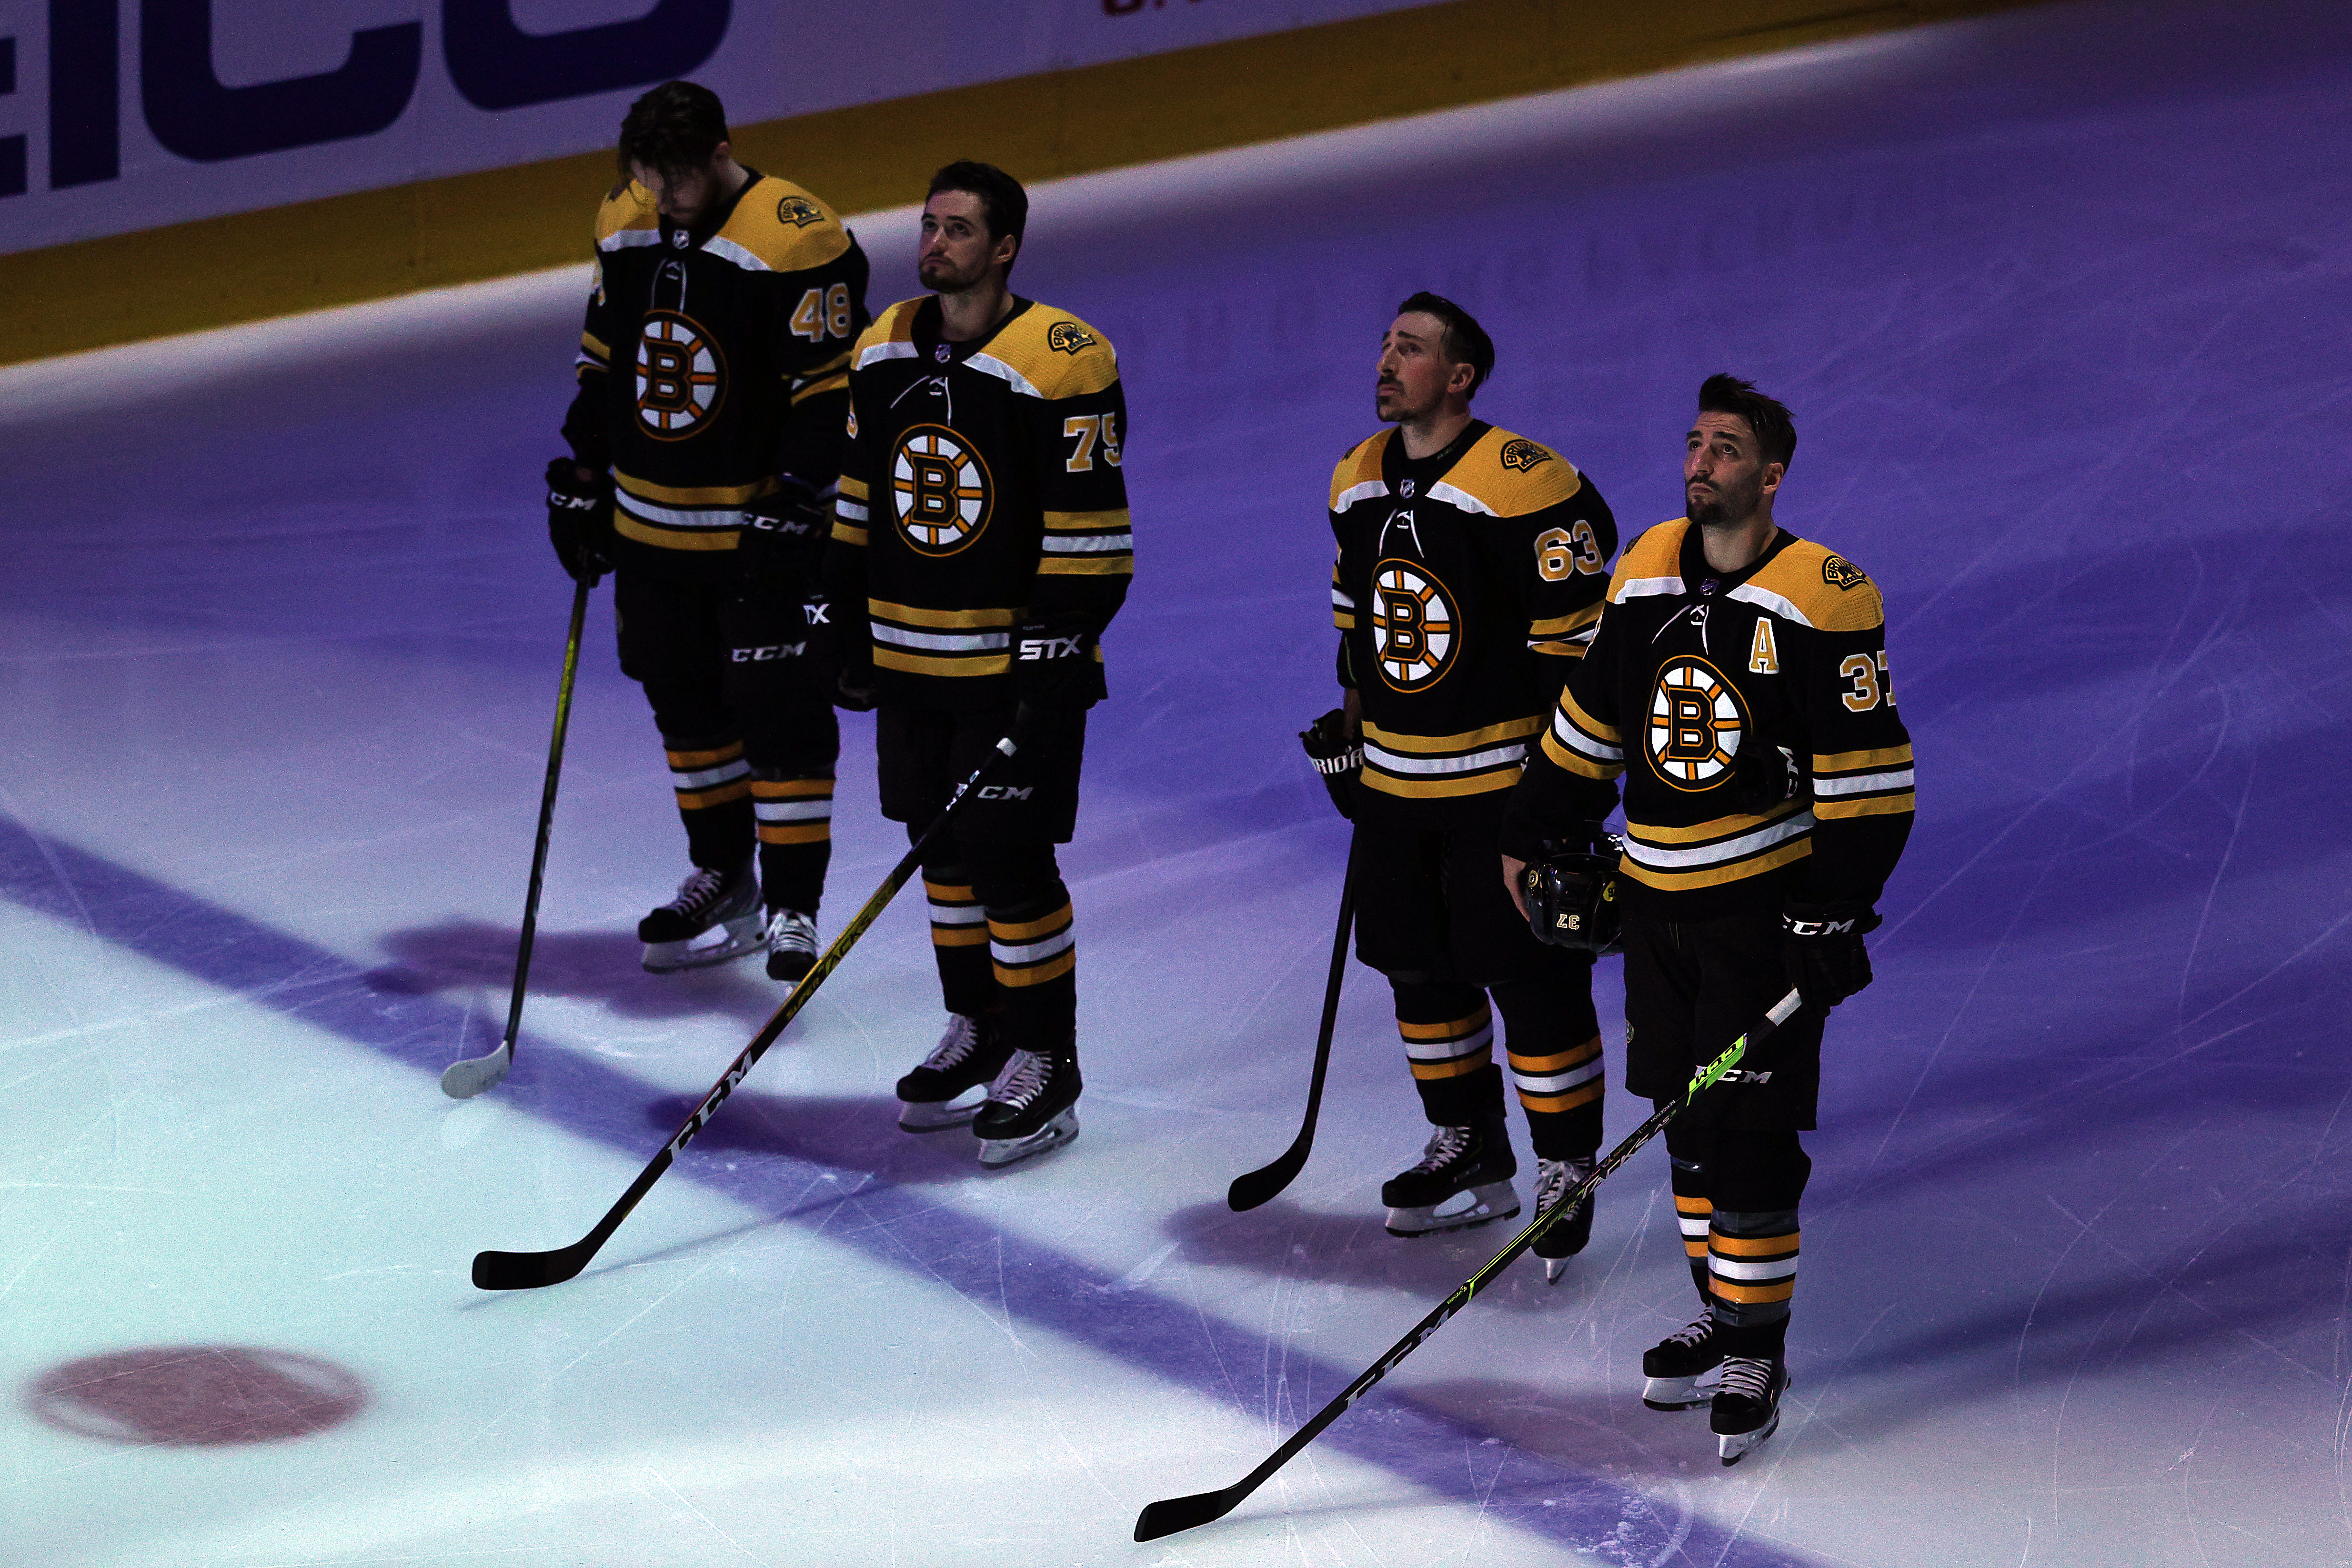 Is There a Better N.H.L. Team Than the Bruins? - The New York Times